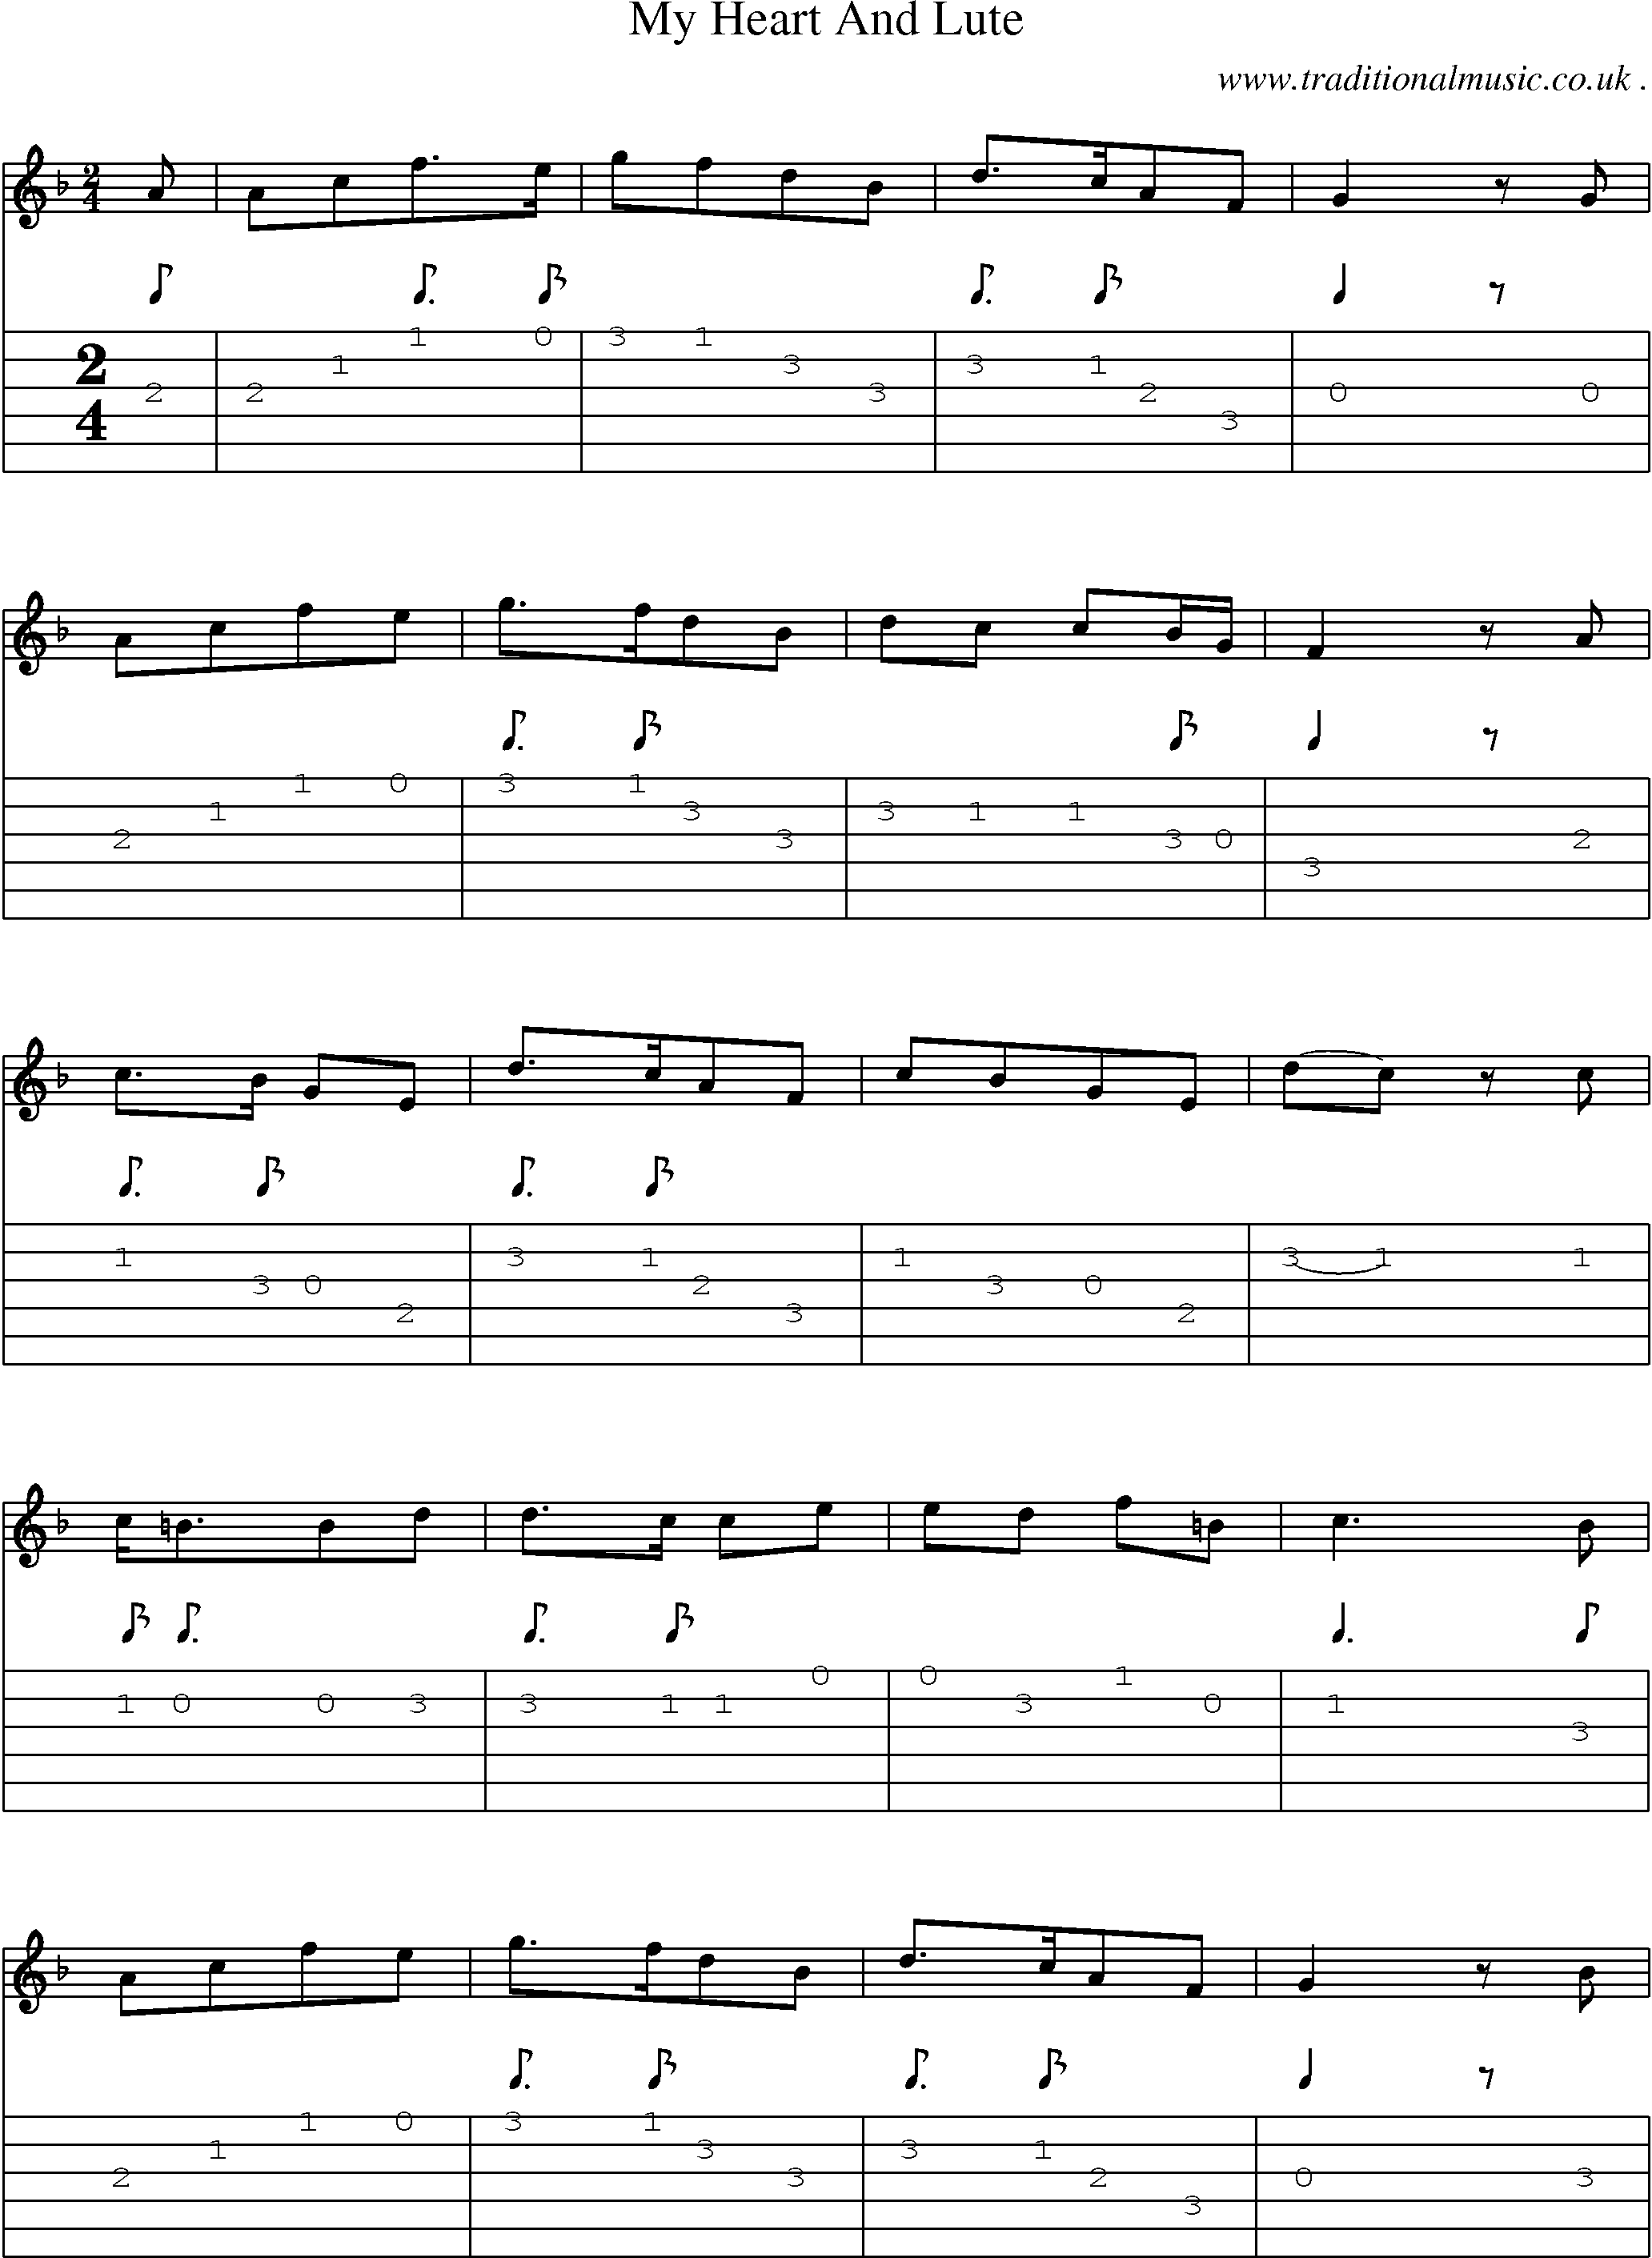 Sheet-Music and Guitar Tabs for My Heart And Lute